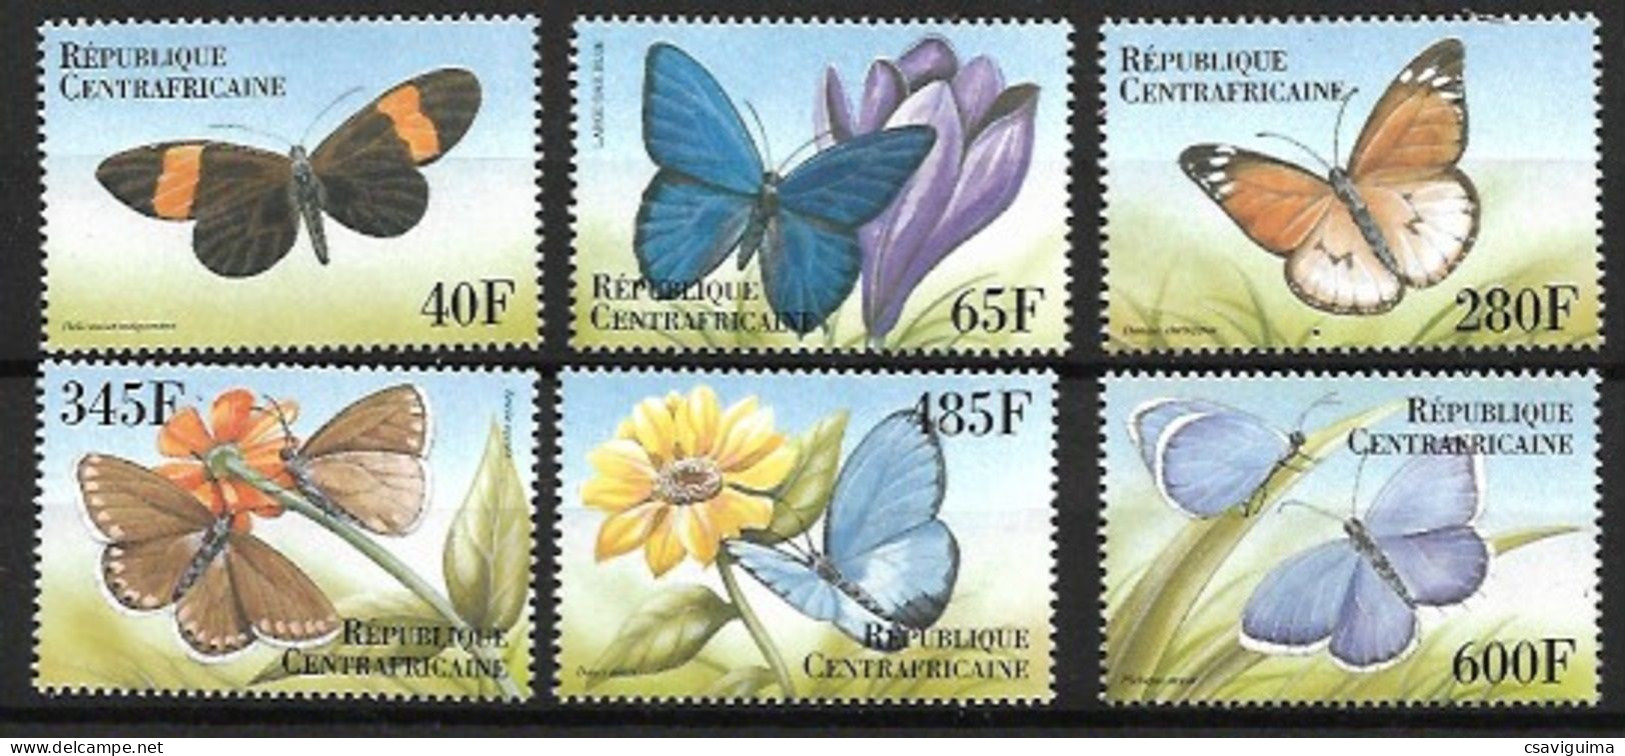 Central Africa Rep. (Centrafricaine) - 2000 - Butterflies - Yv 1618CS/CY - Schmetterlinge